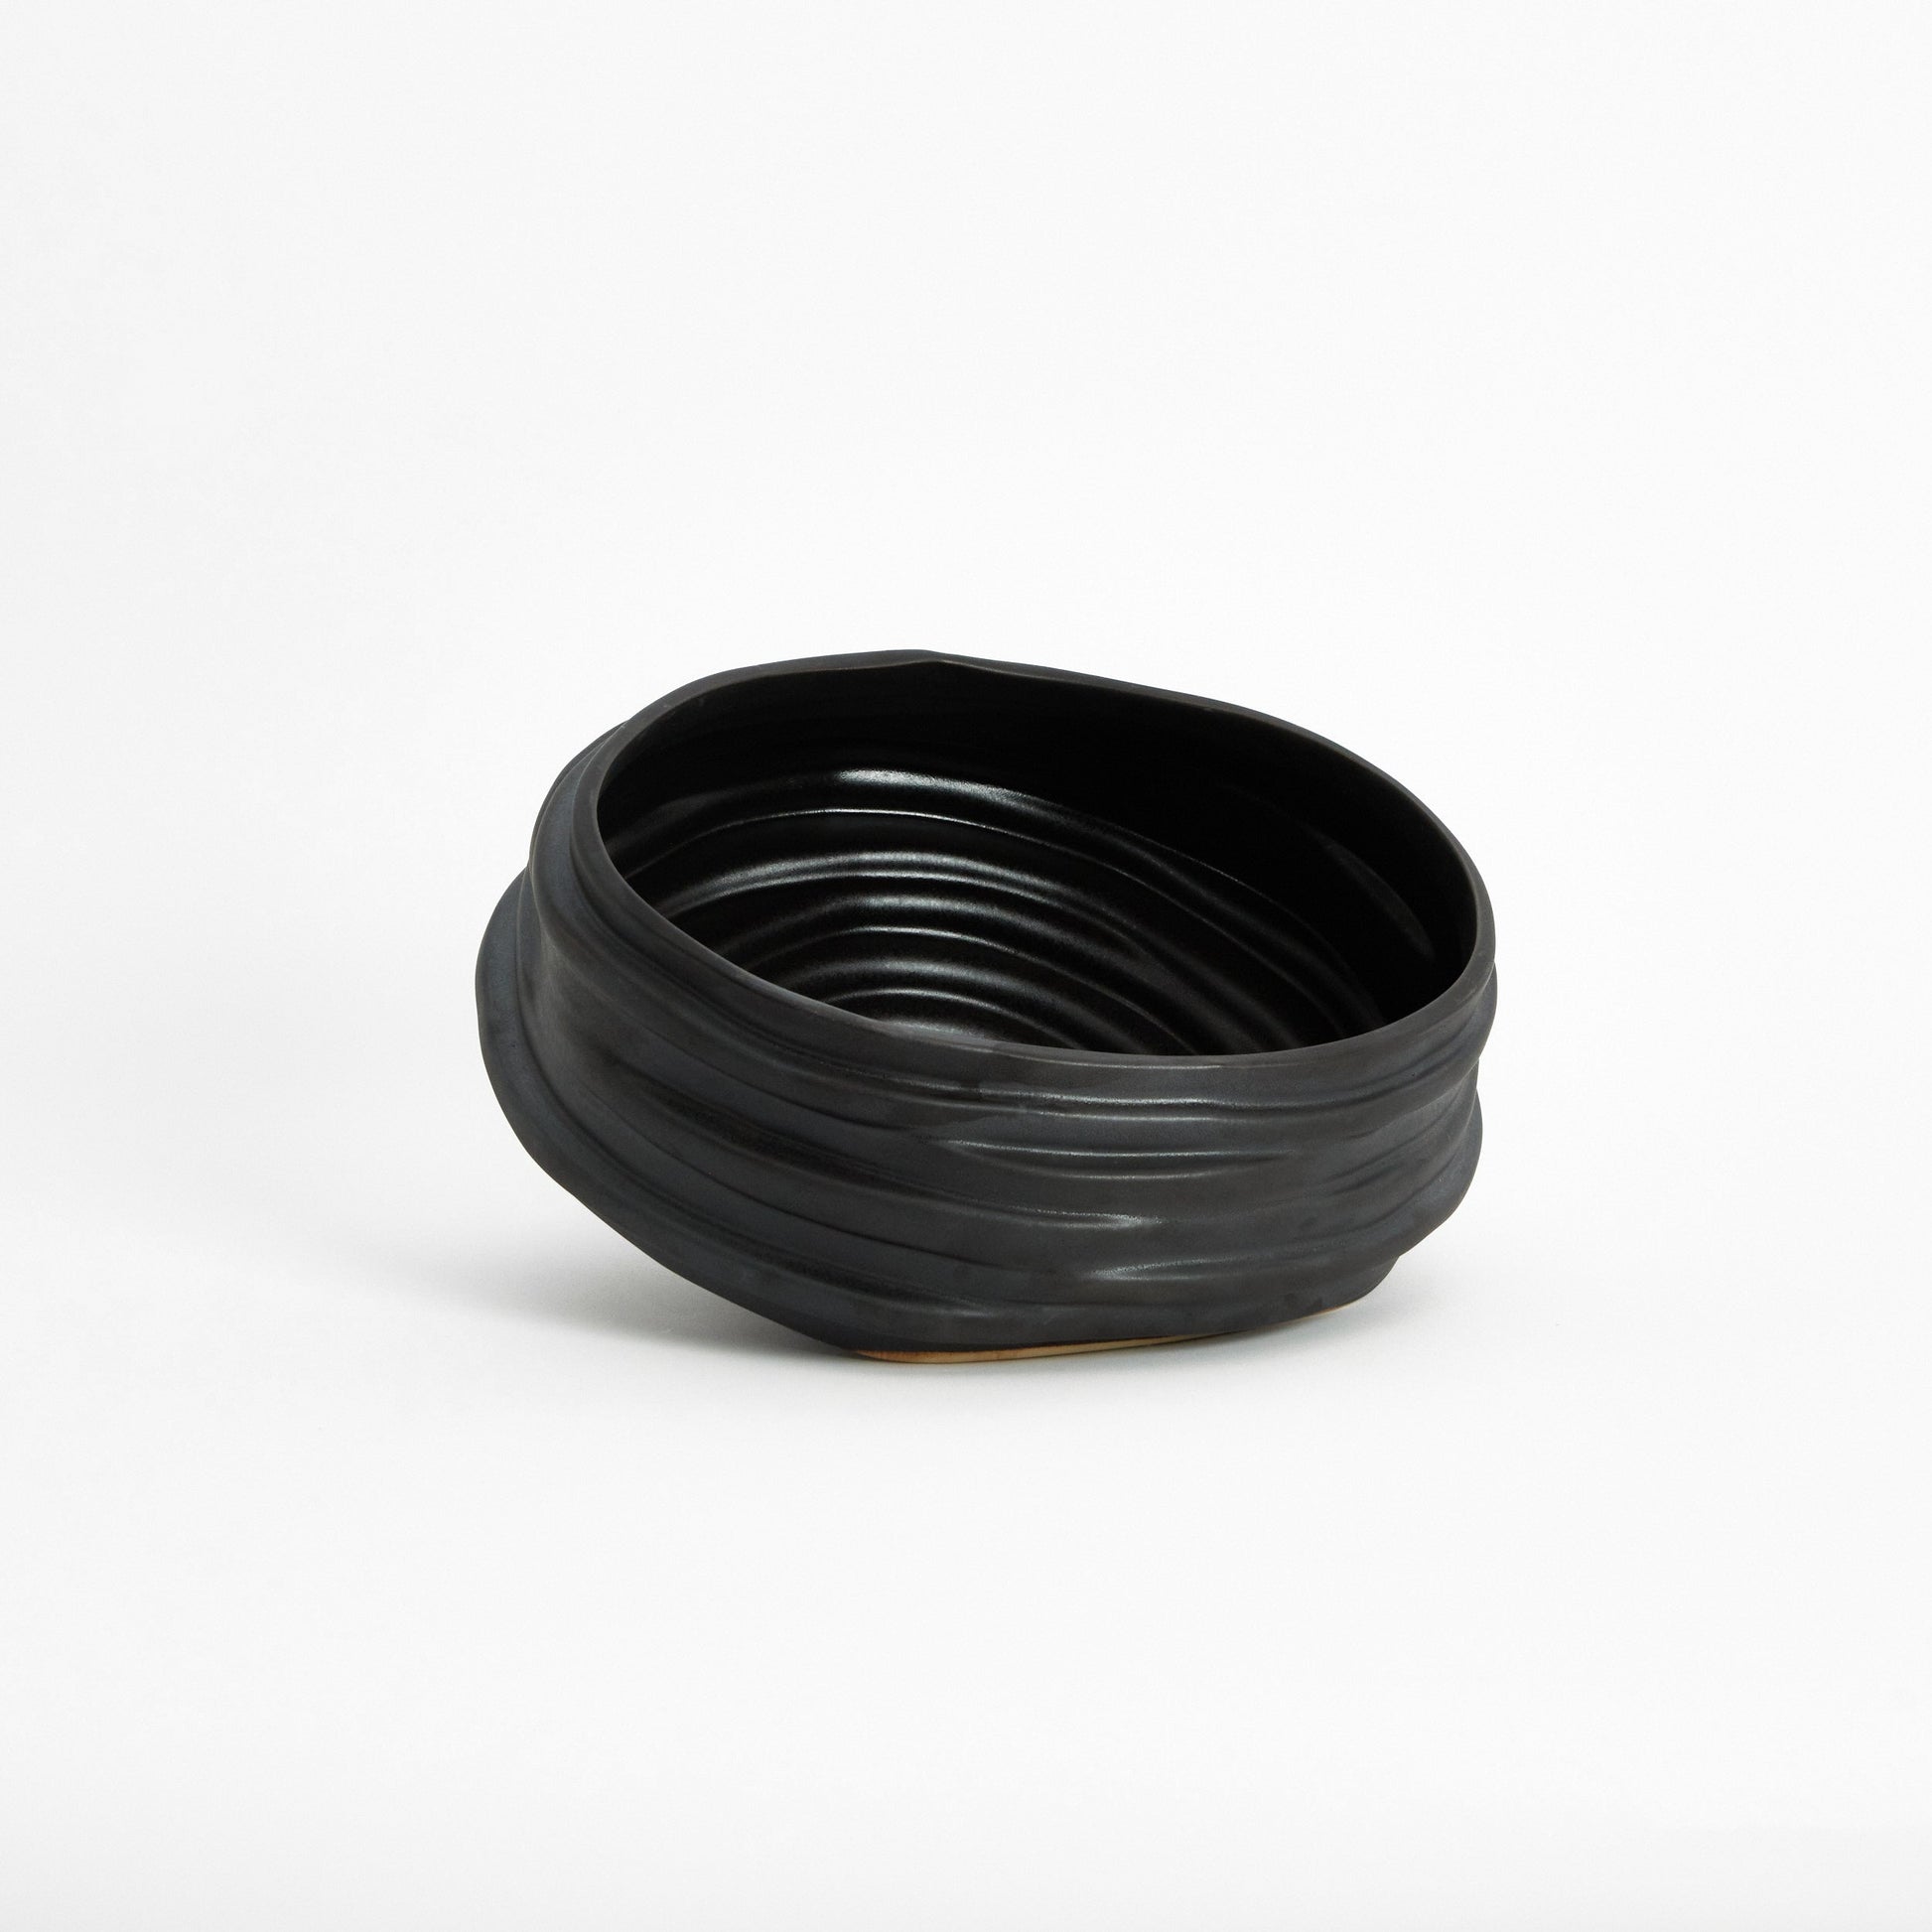 Alfonso Fruit Bowl in Graphite Bowls